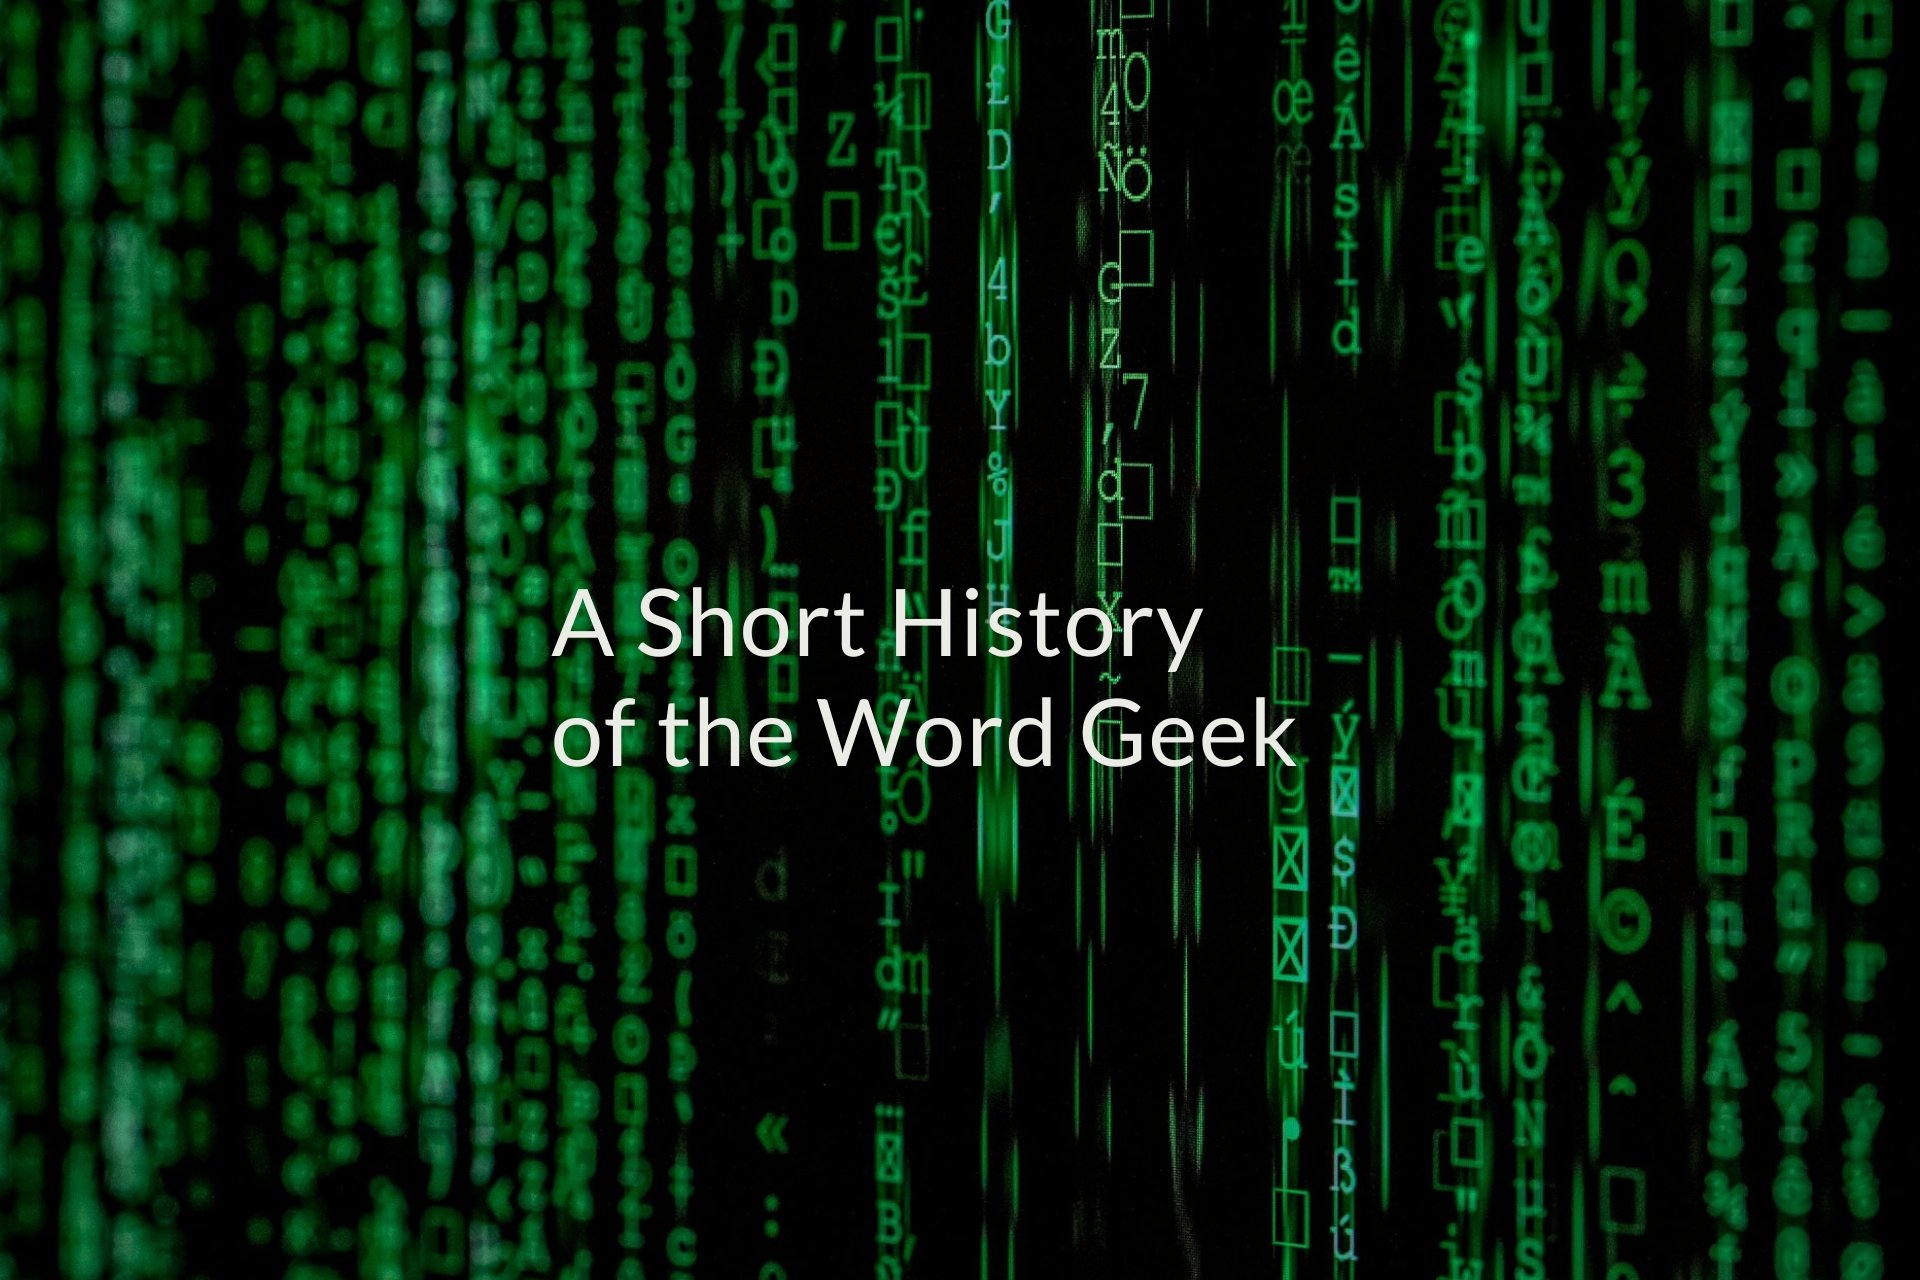 A Short History of the Word Geek